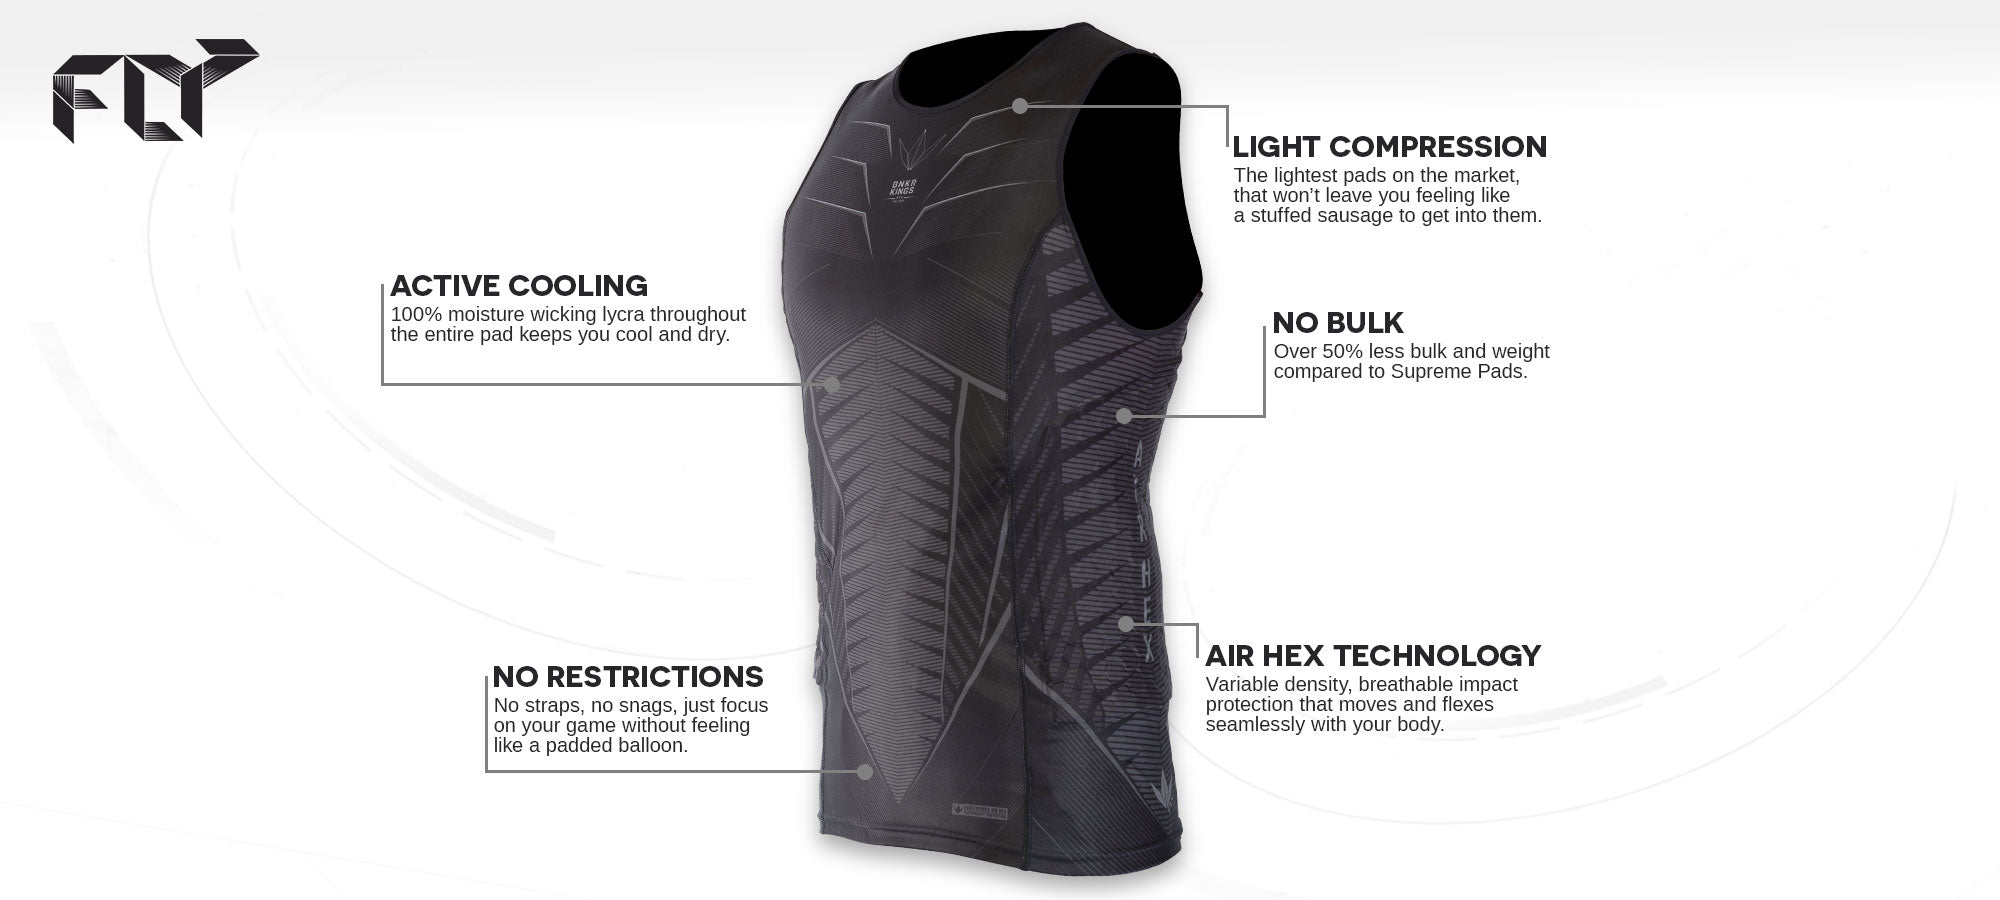 FLY Sleeveless Compression Top - Feature Banner